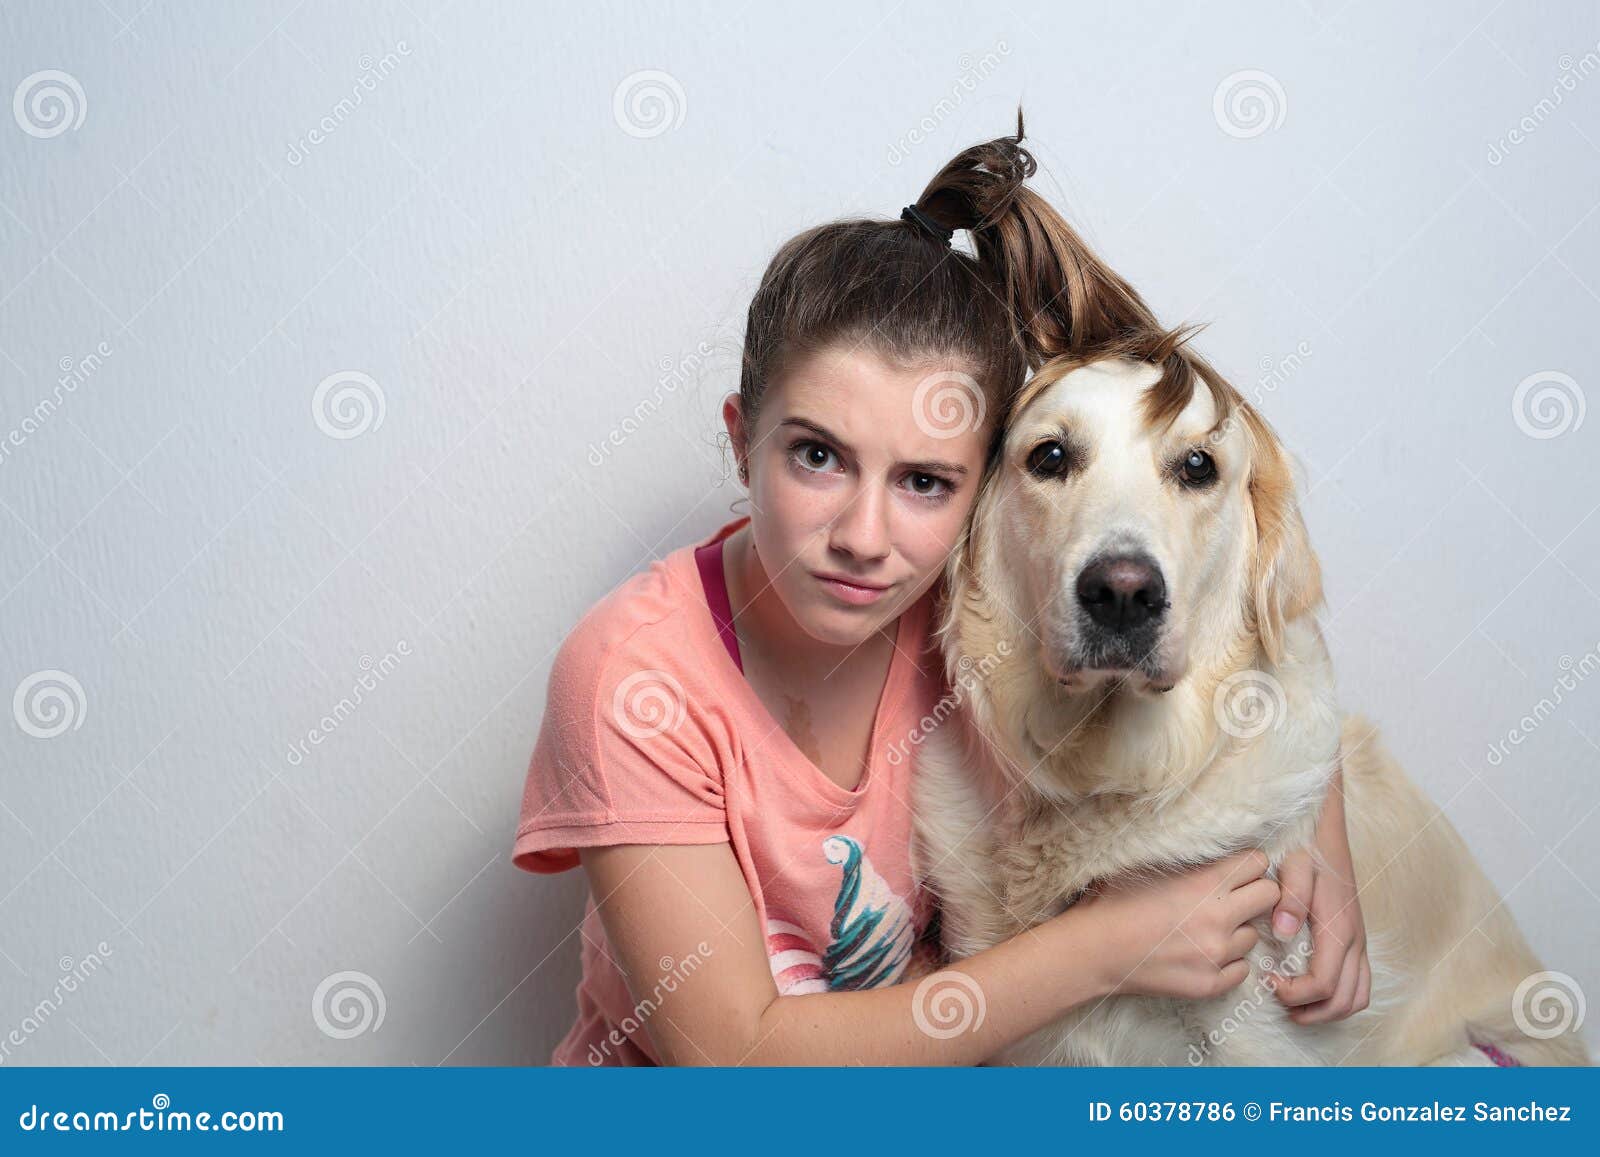 girl with her dog